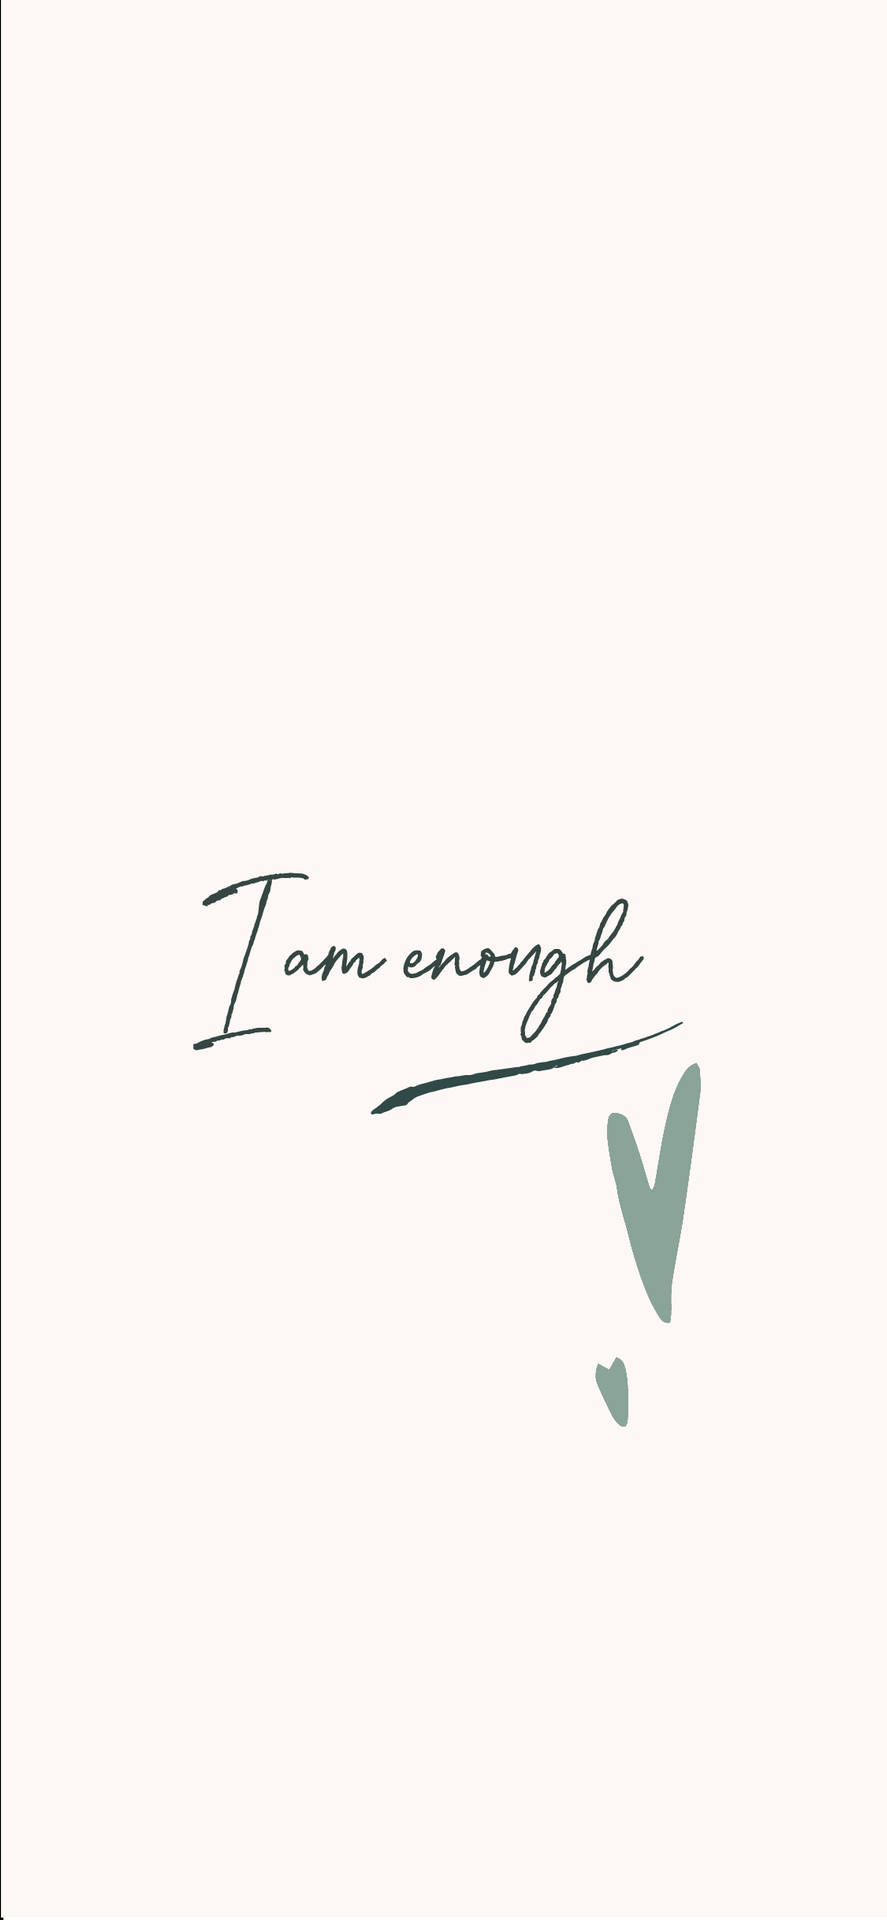 I am enough wallpaper  Good morning wishes quotes Enough is enough  quotes Girly wall art